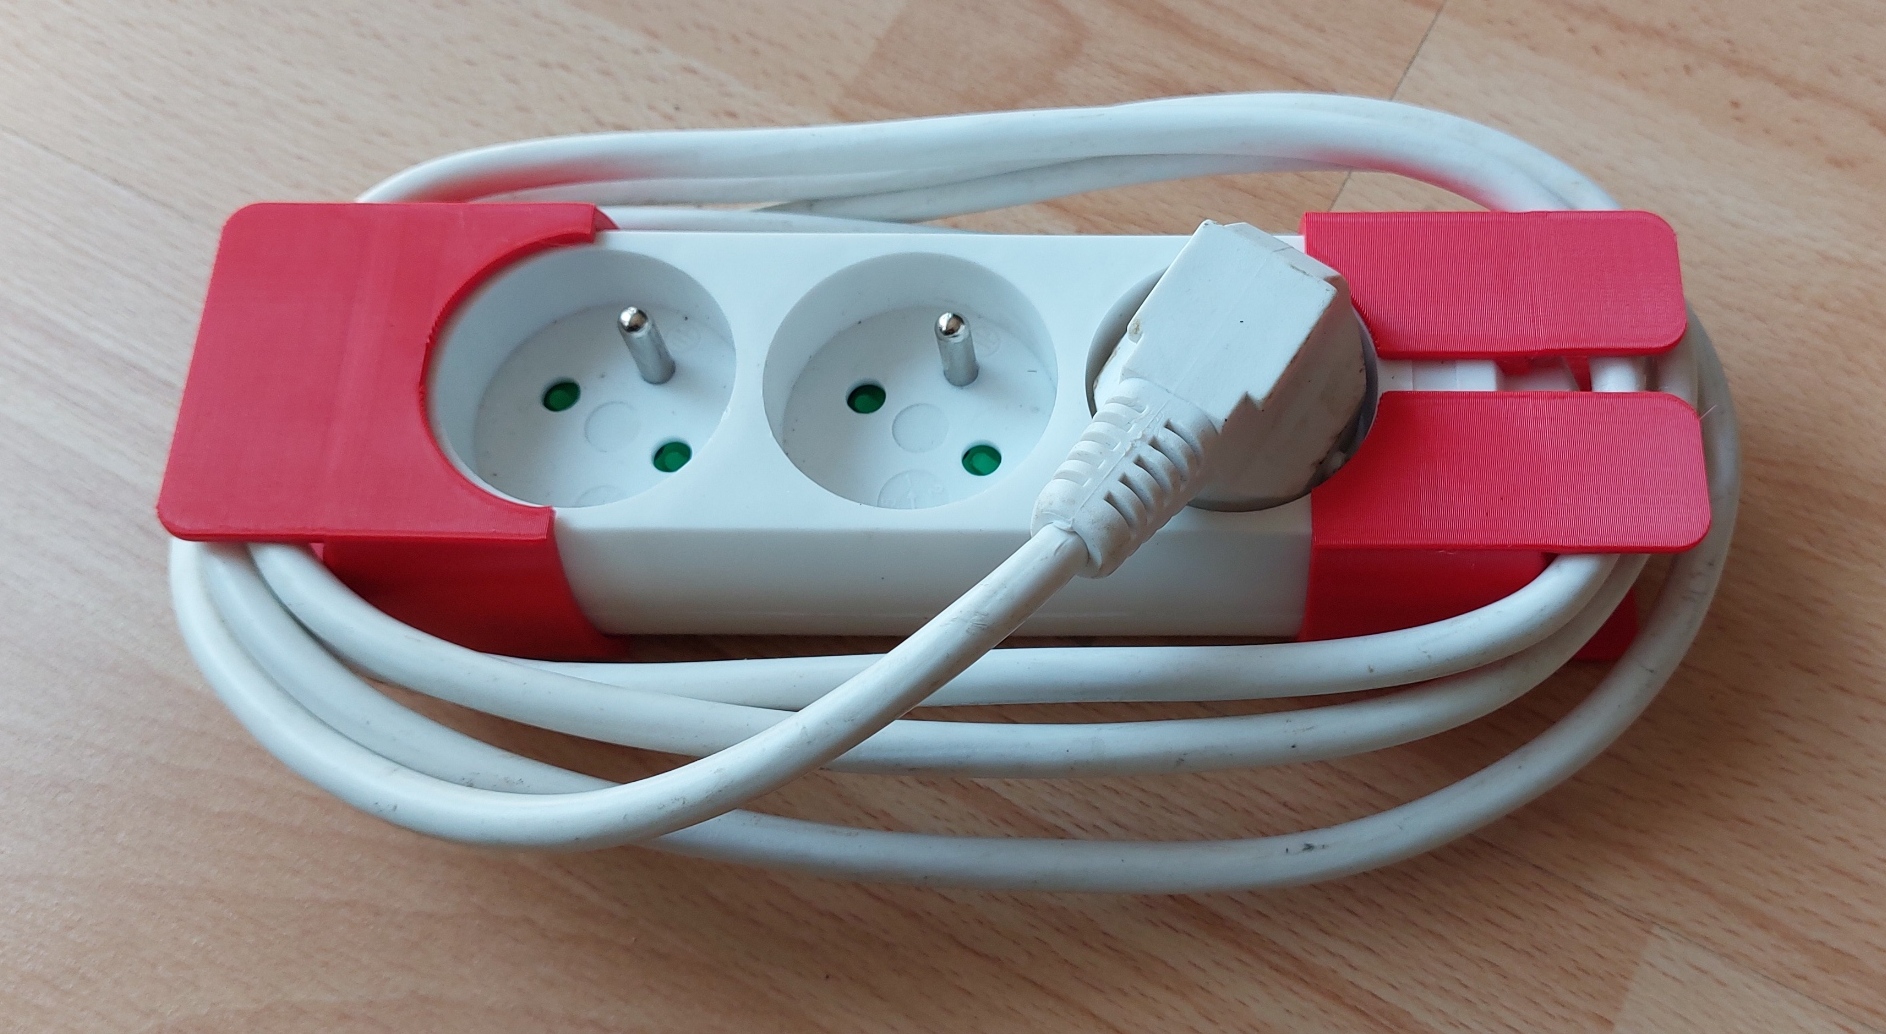 Cable organizer for extension cord